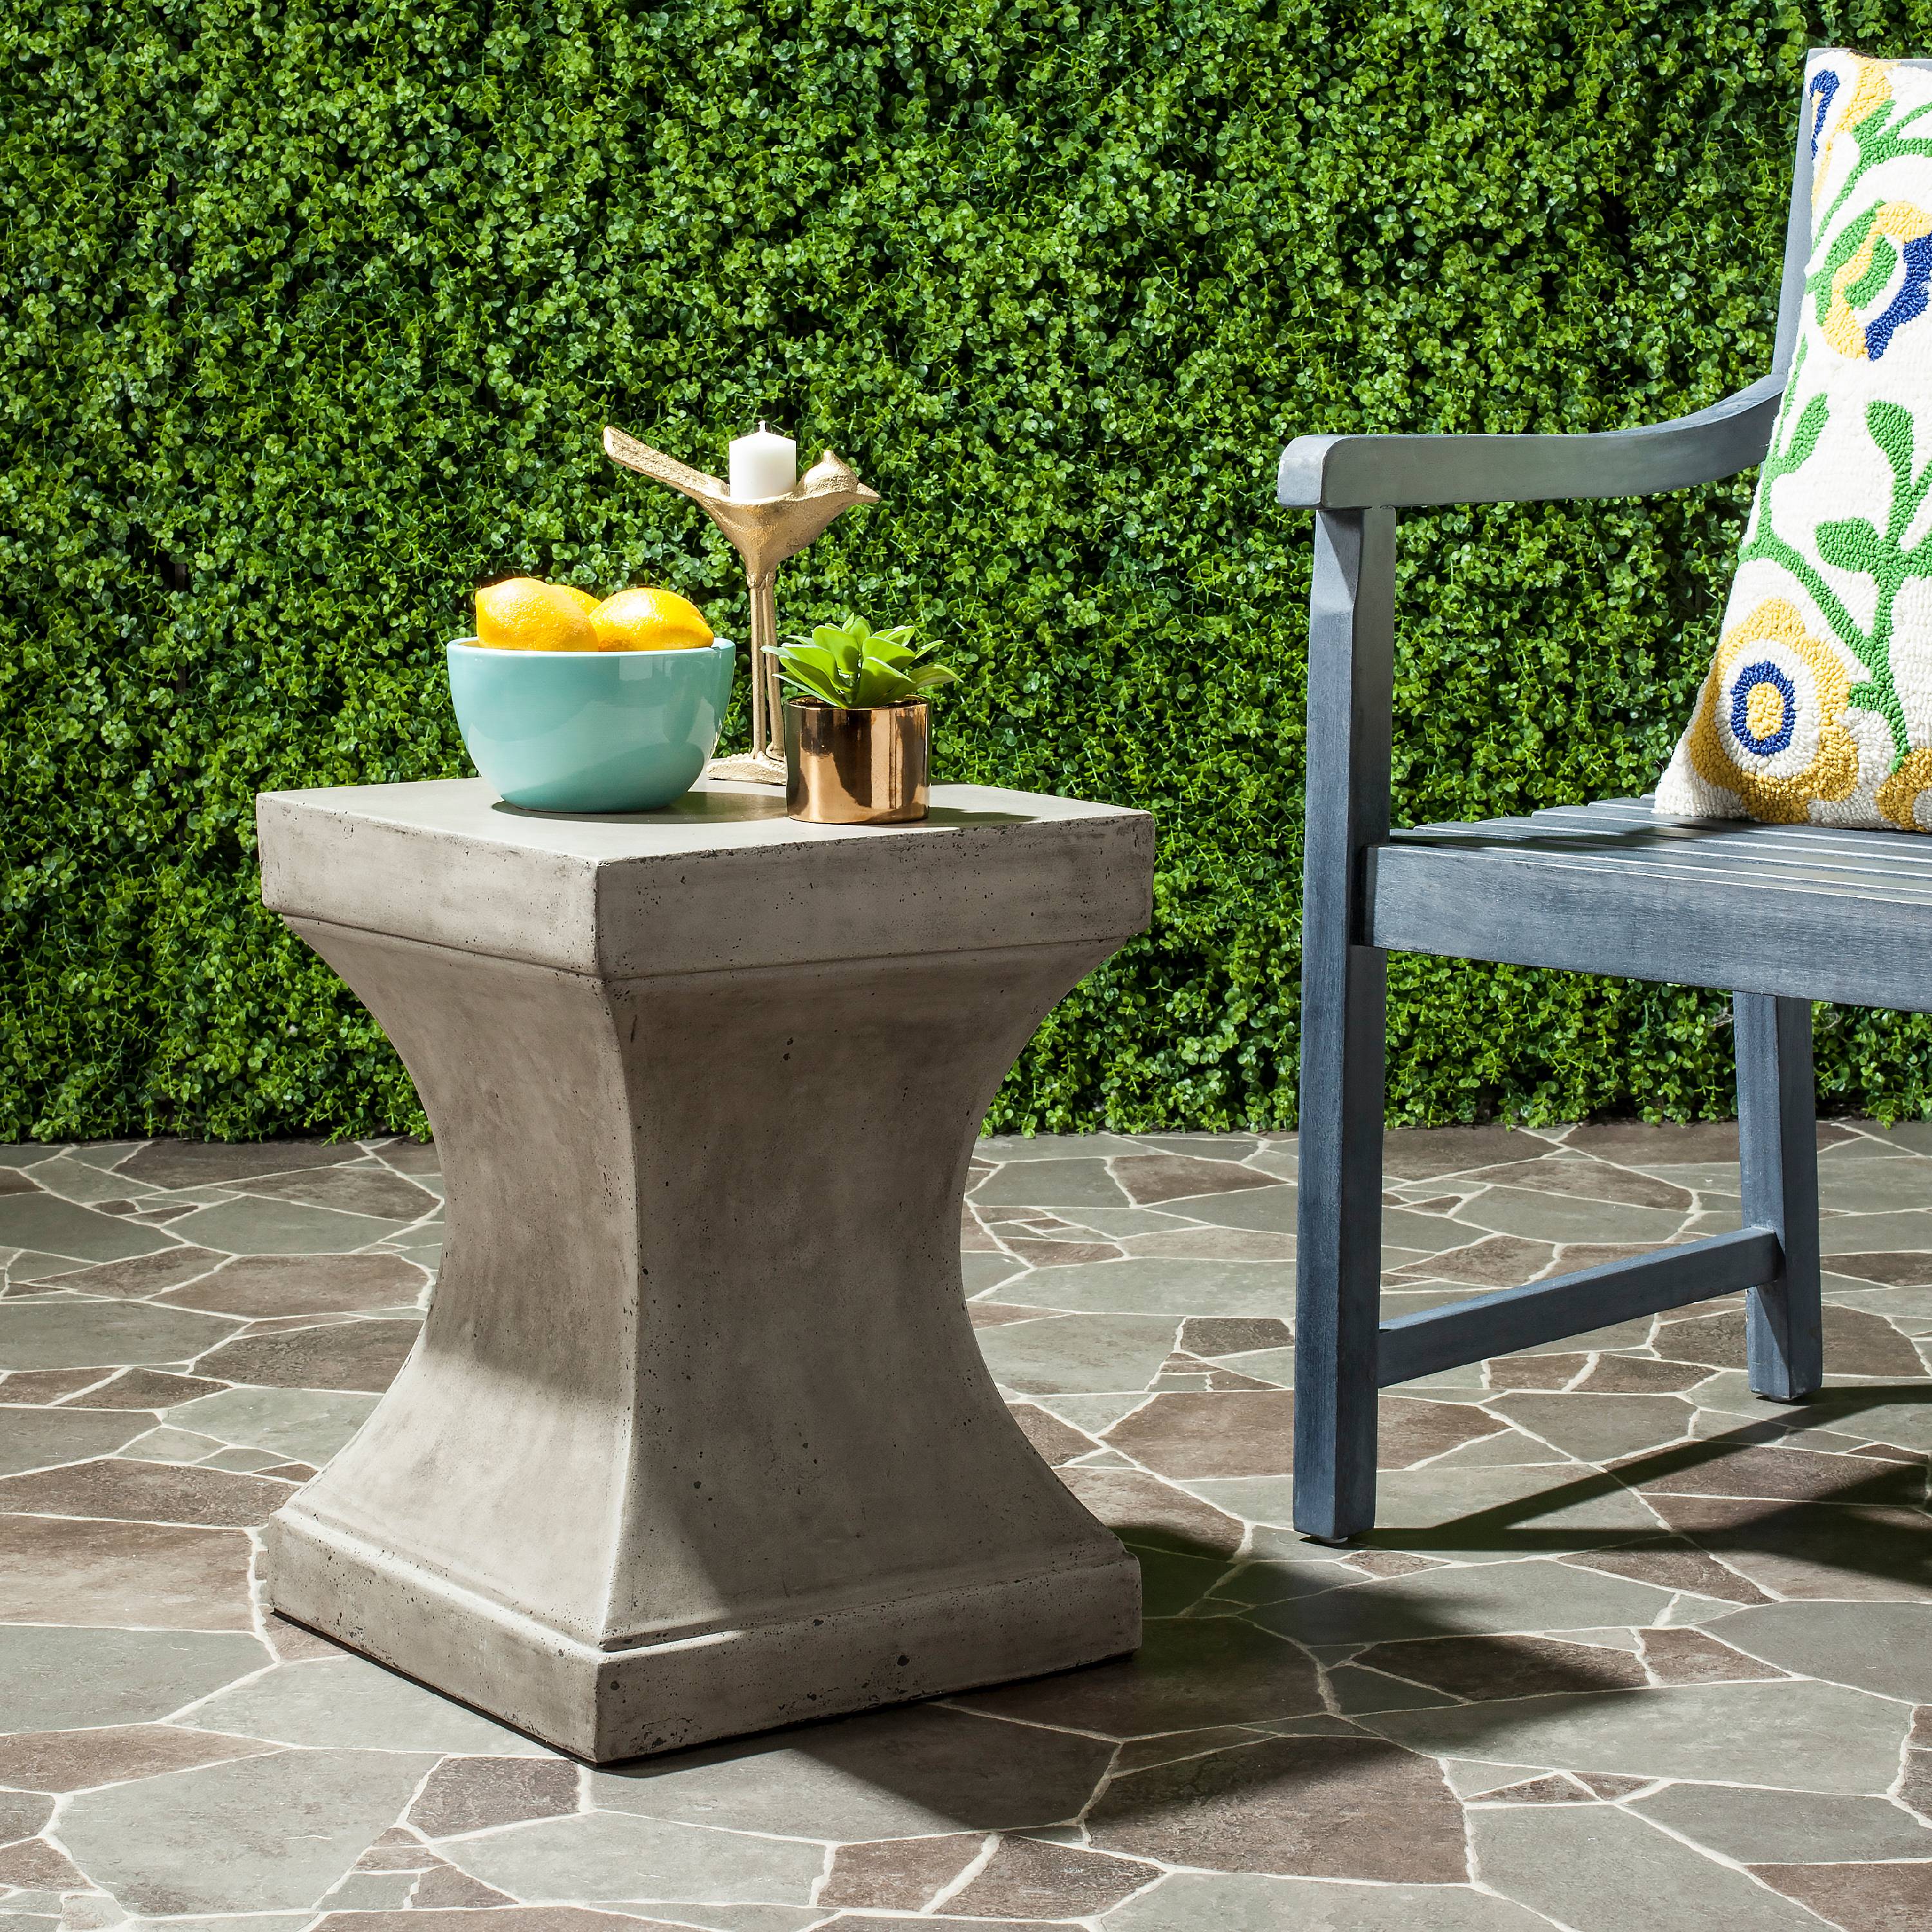 Safavieh Curby Outdoor Modern Concrete Accent Table - Dark Grey - image 1 of 5